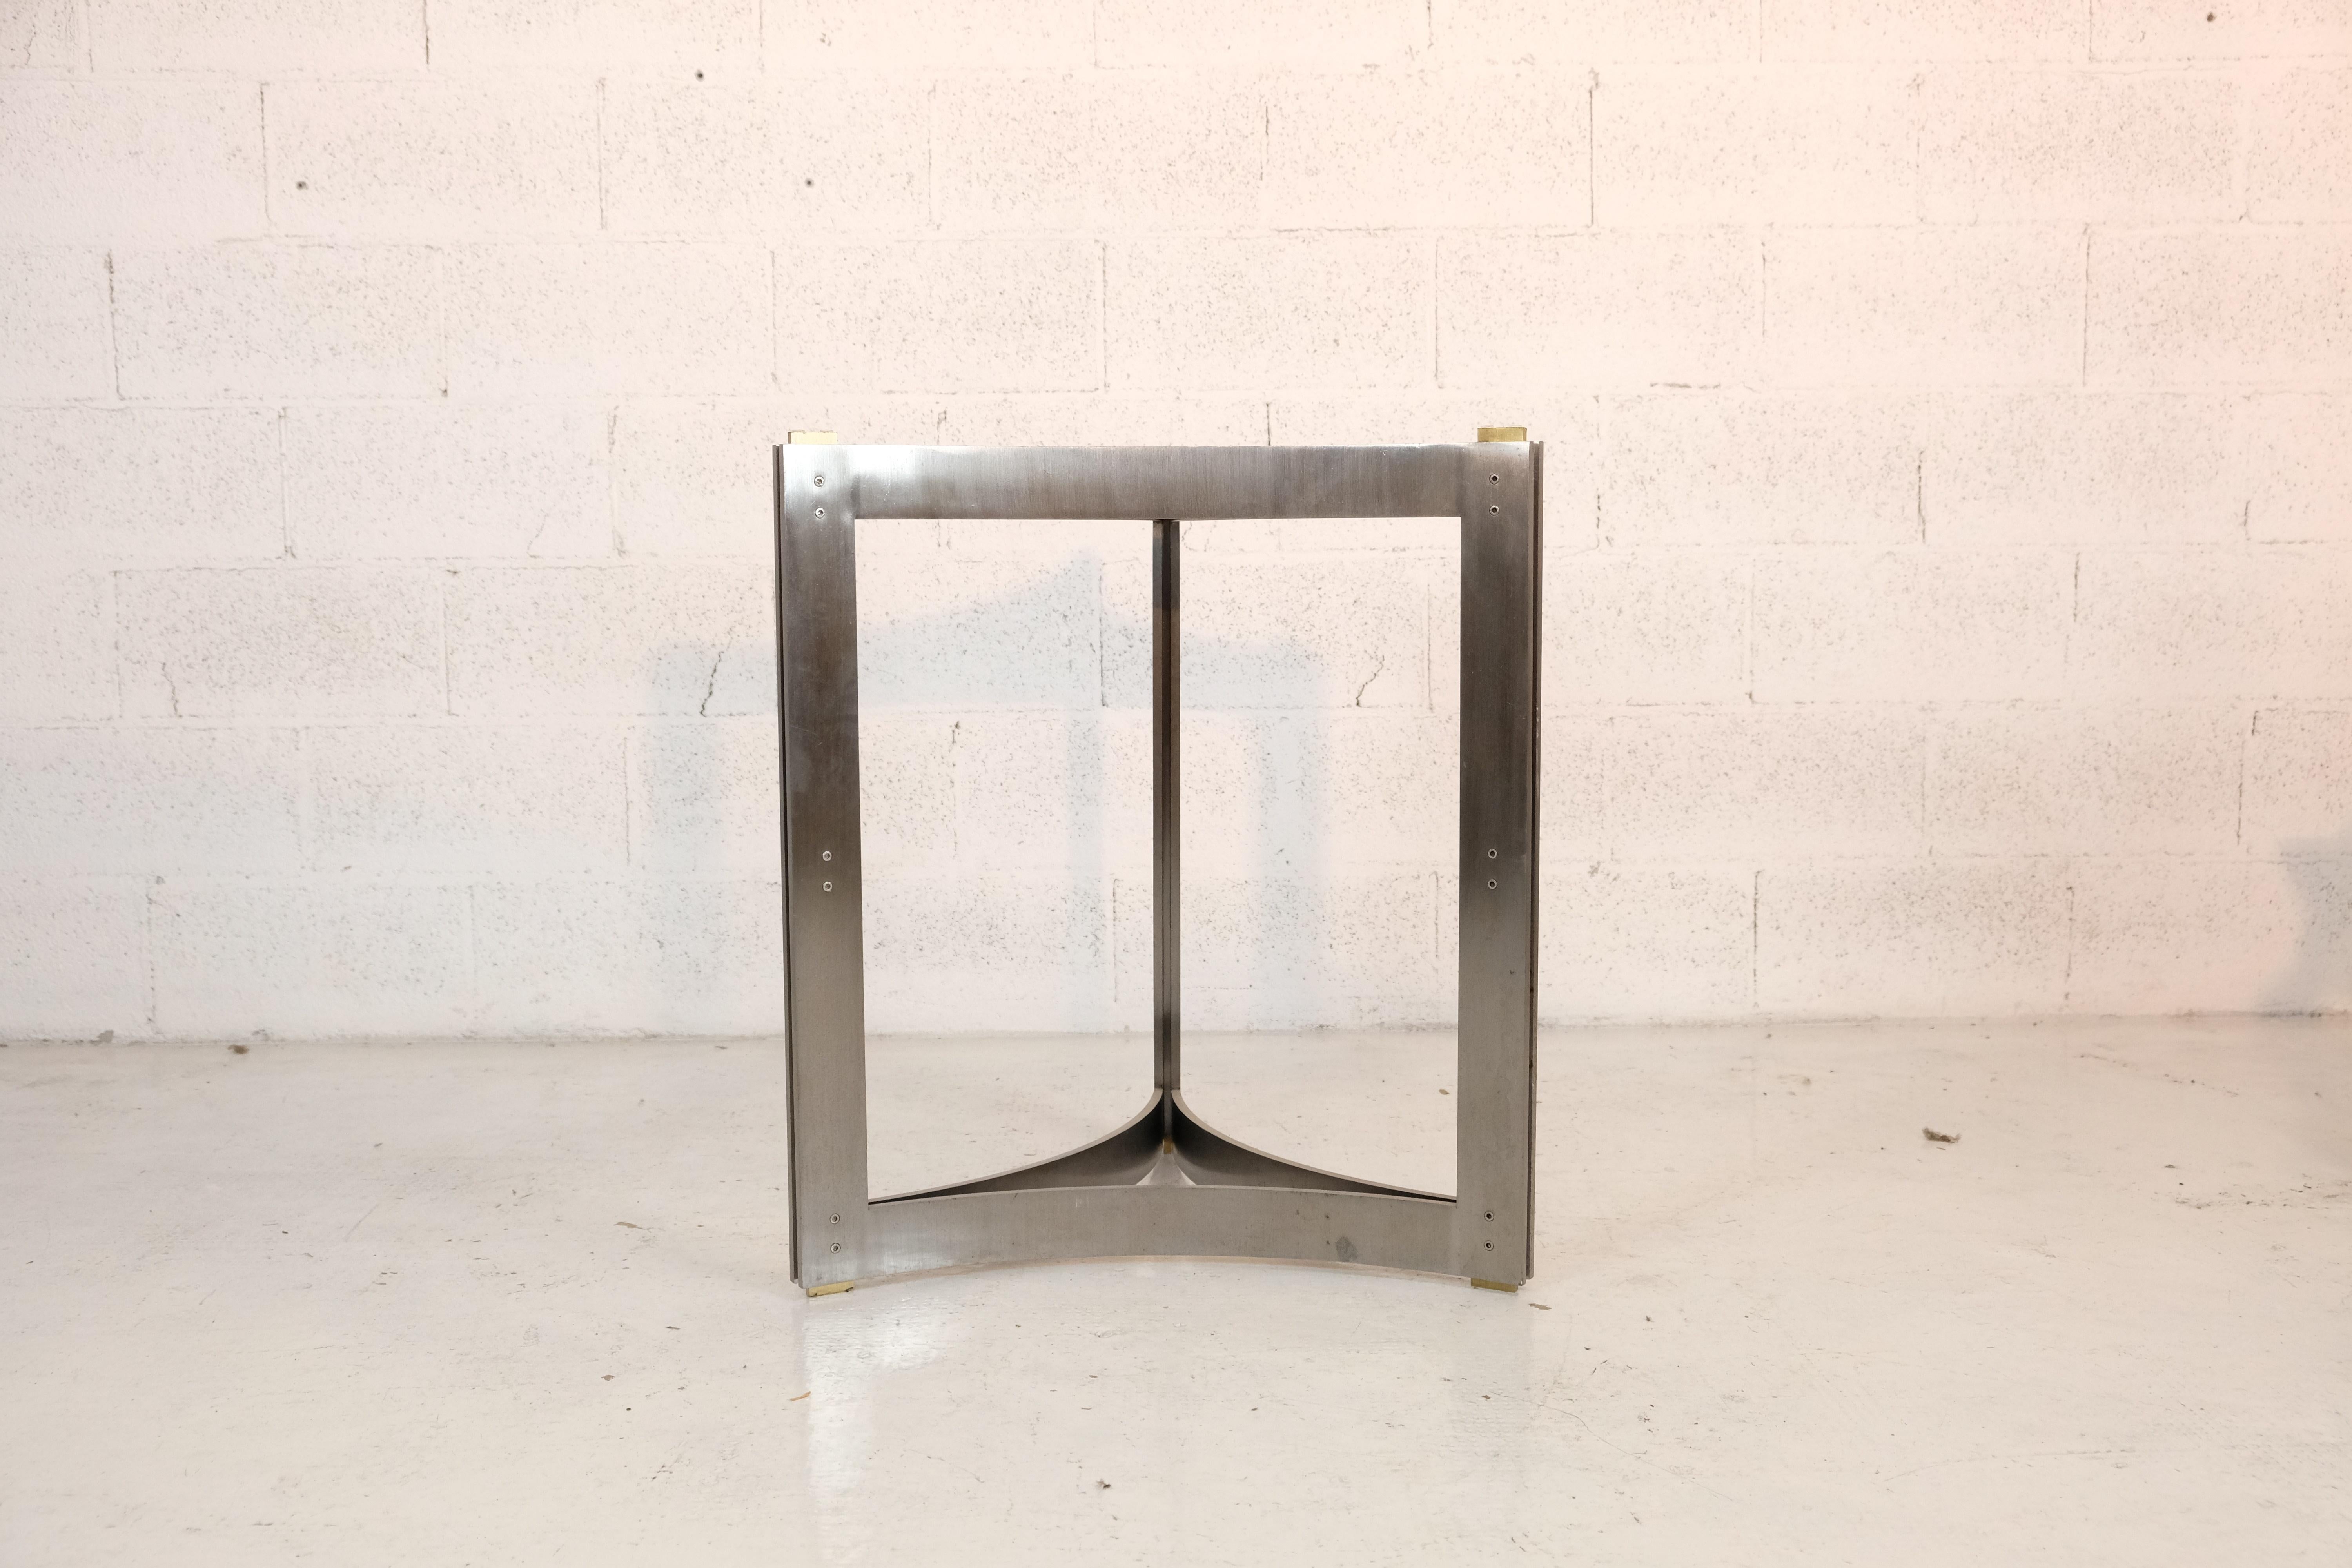 Design in the style of Carlo Scarpa
Drawn metal structure and glass top
Dimensions: Diameter 120 cm - H 74 cm - weight 70 kg
CONDITION: very good with small and inevitable signs of age and use.